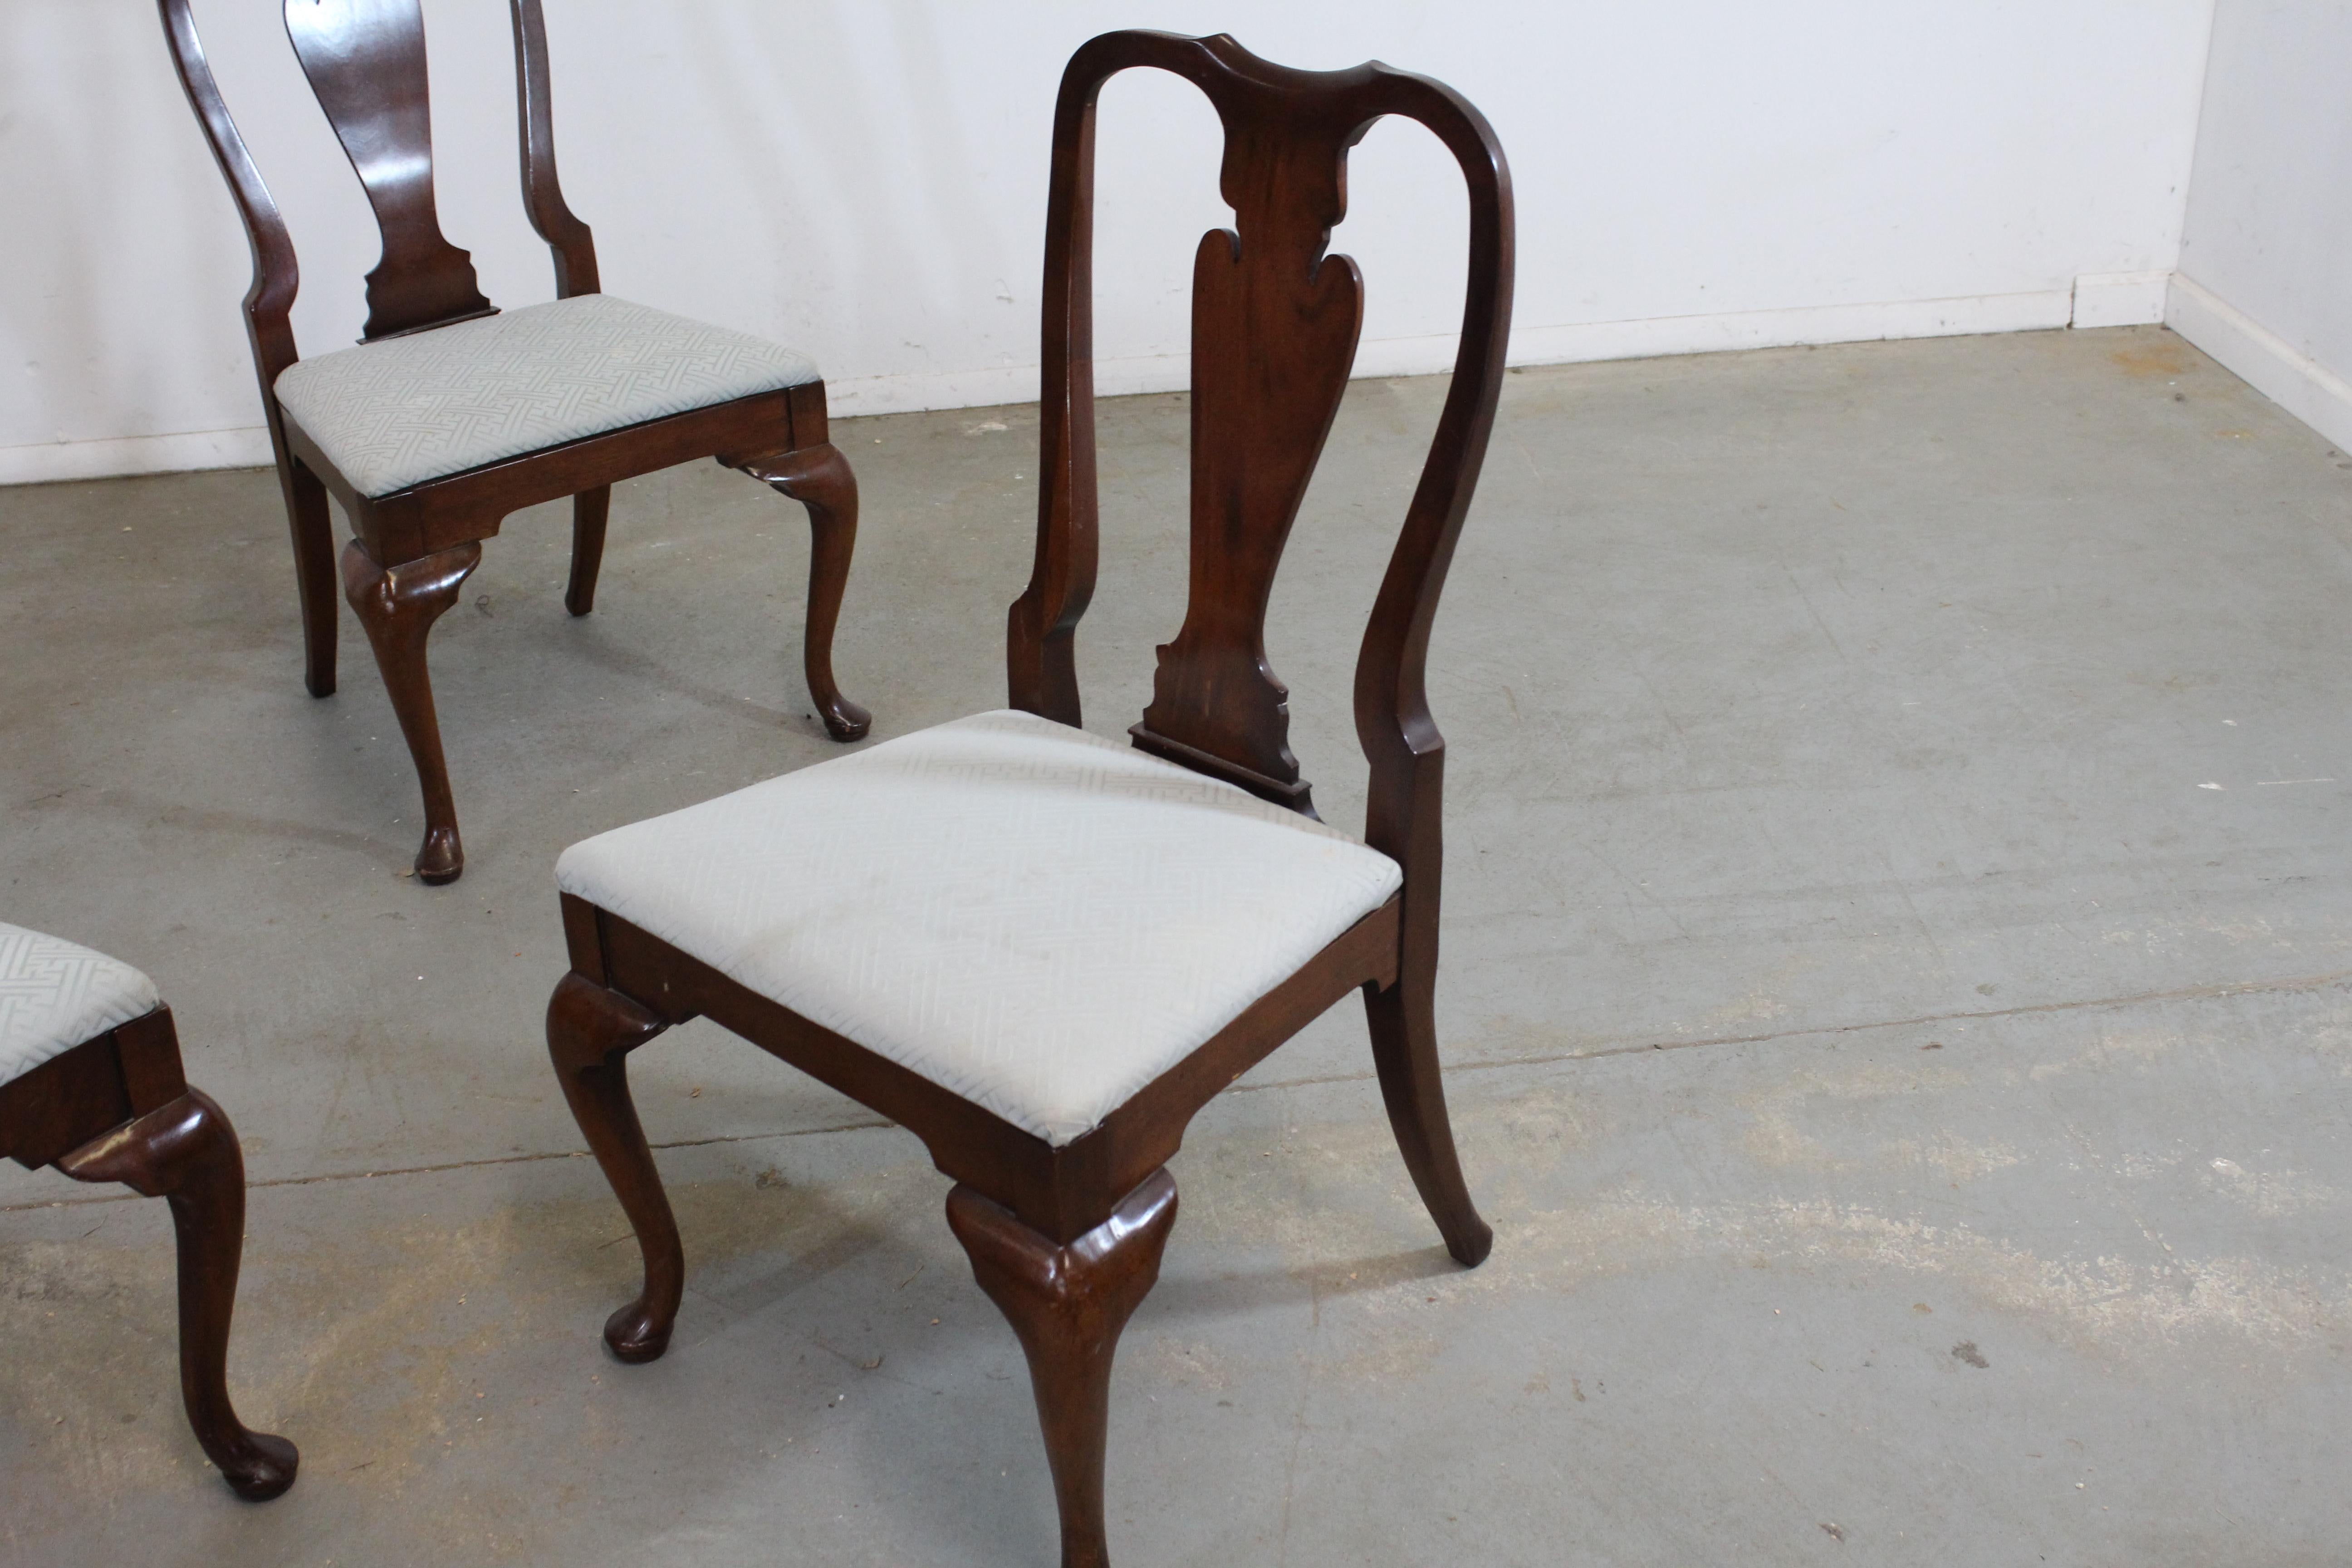 Set of 4 reproduction Queen Anne solid mahogany dining side chairs

Offered is a set of 4 reproduction Queen Anne solid mahogany dining side chairs. They are made of solid mahogany wood and have upholstered seats. In good condition for their age,